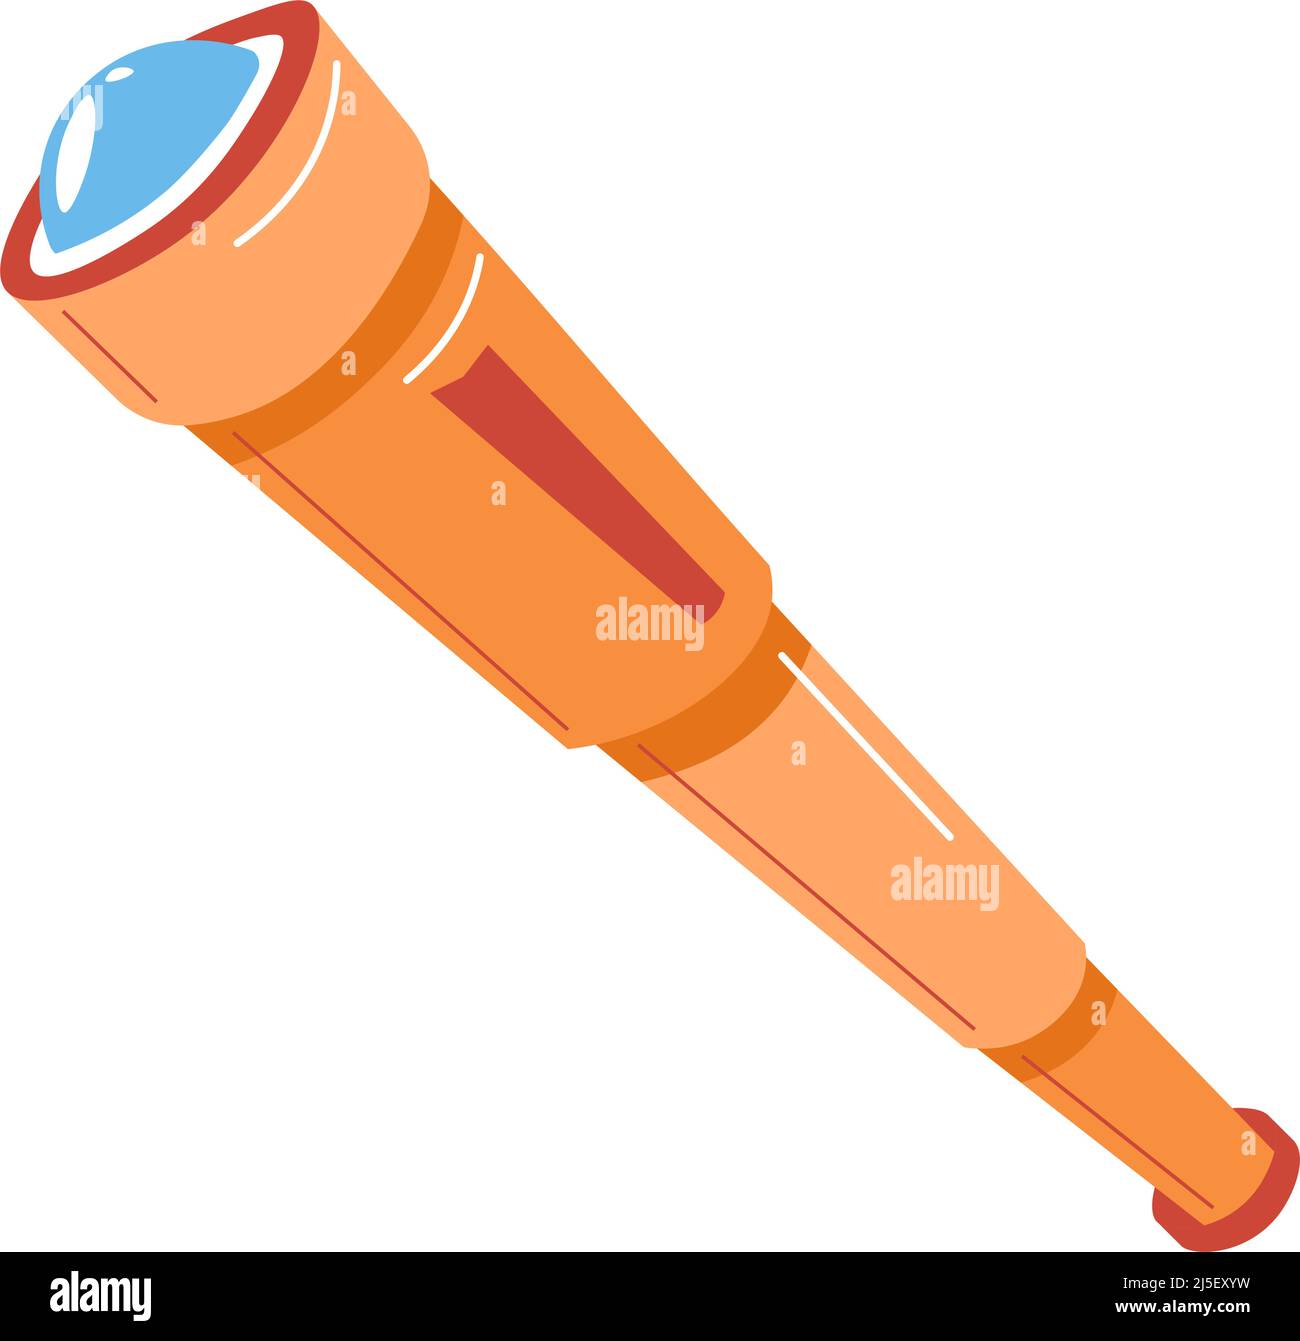 Telescope watching tube with magnifying glass and zooming lens. Isolated object used for observation and navigation, marine equipment for sailors. Jou Stock Vector